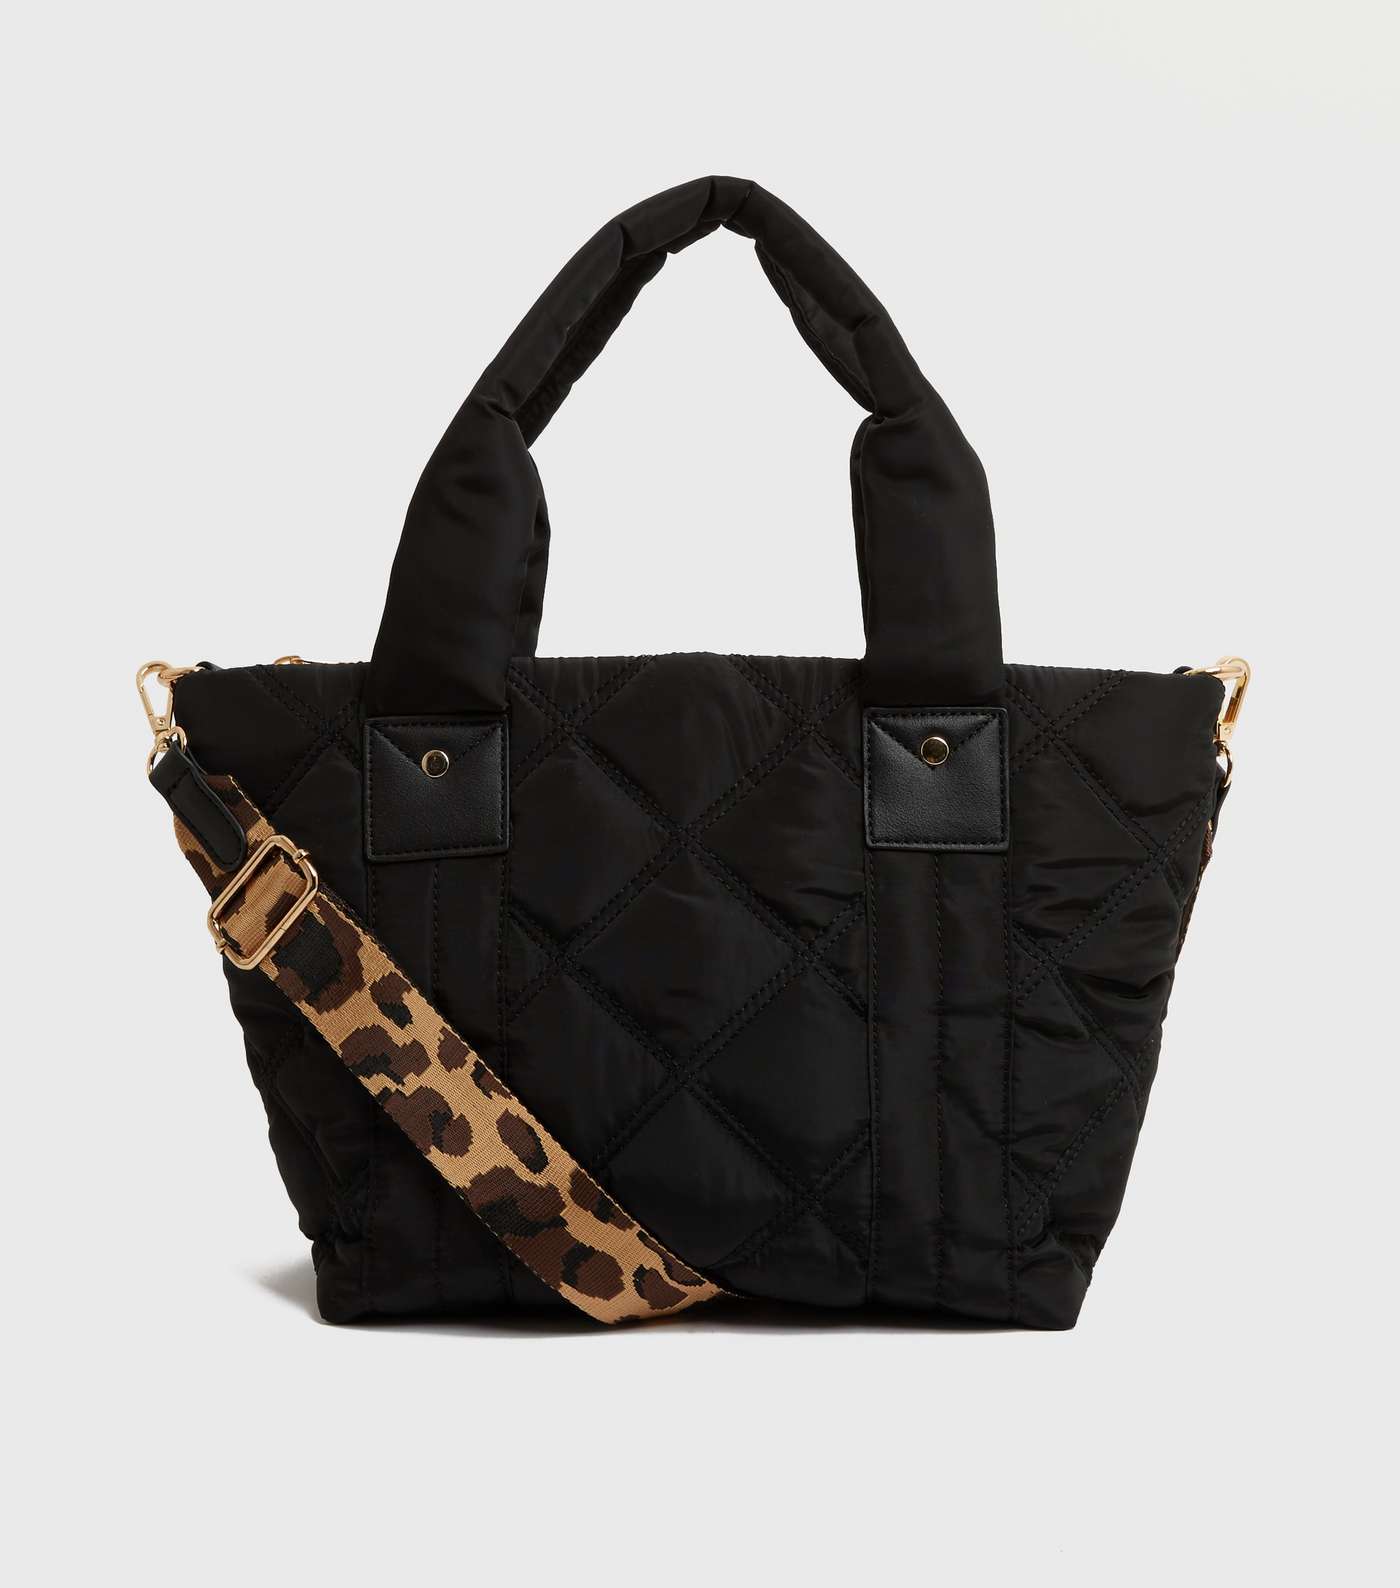 Black Quilted Animal Print Strap Tote Bag